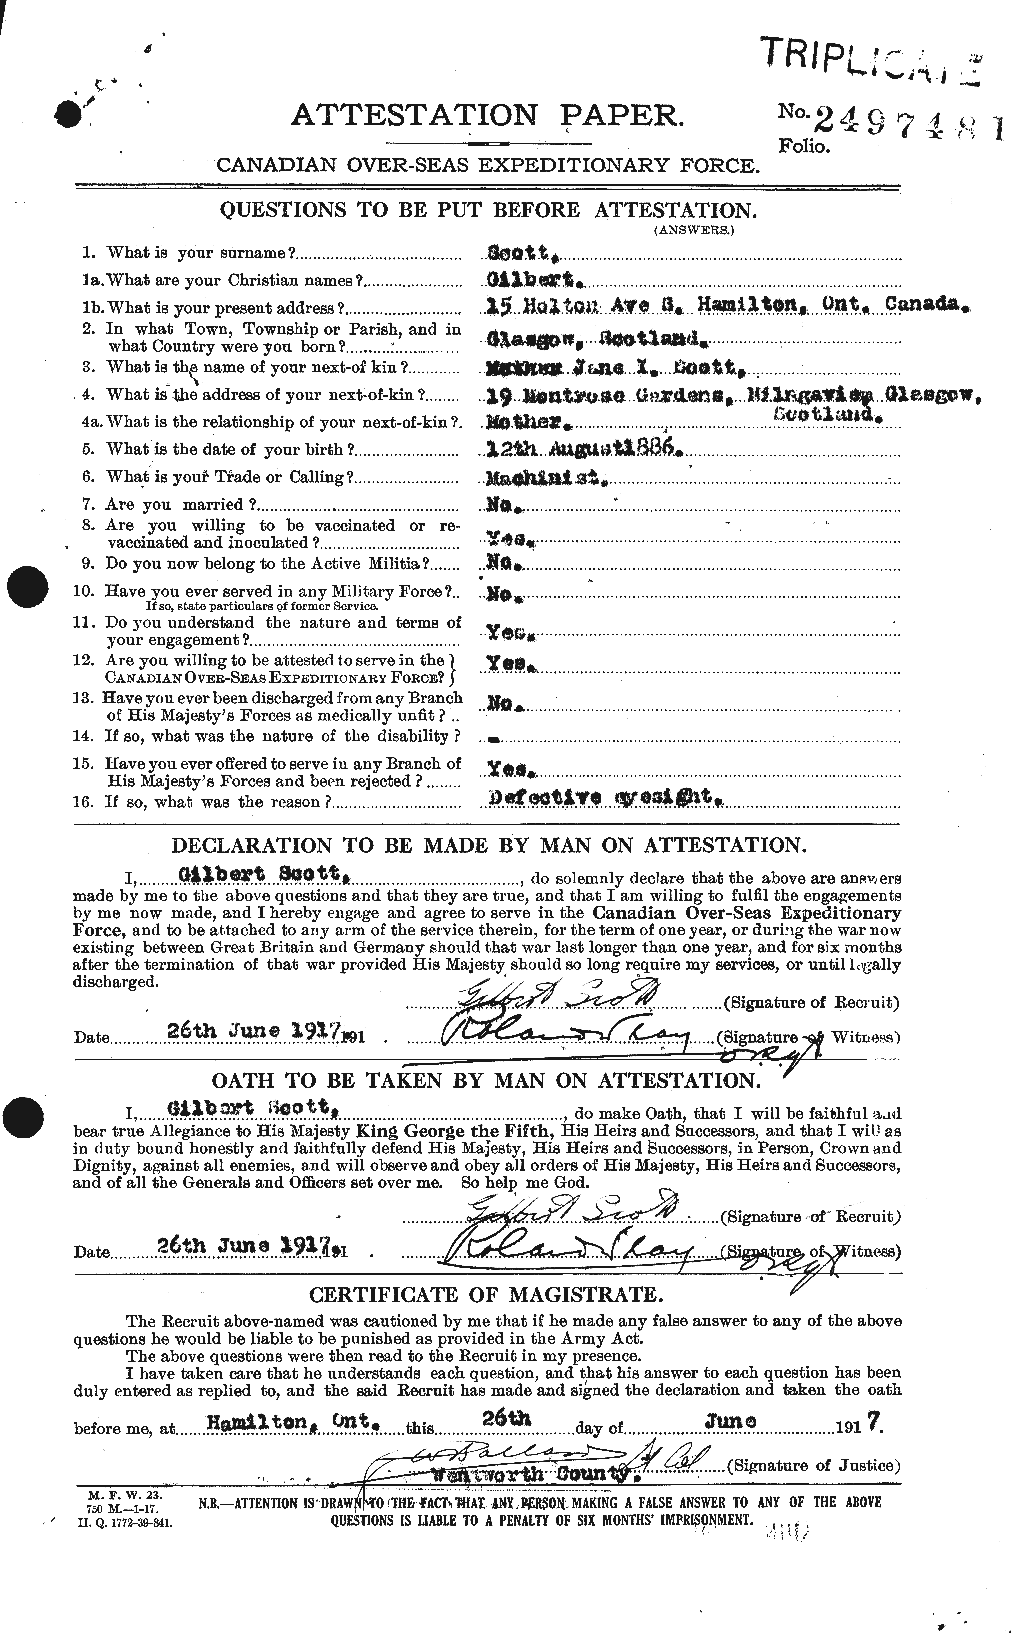 Personnel Records of the First World War - CEF 083121a